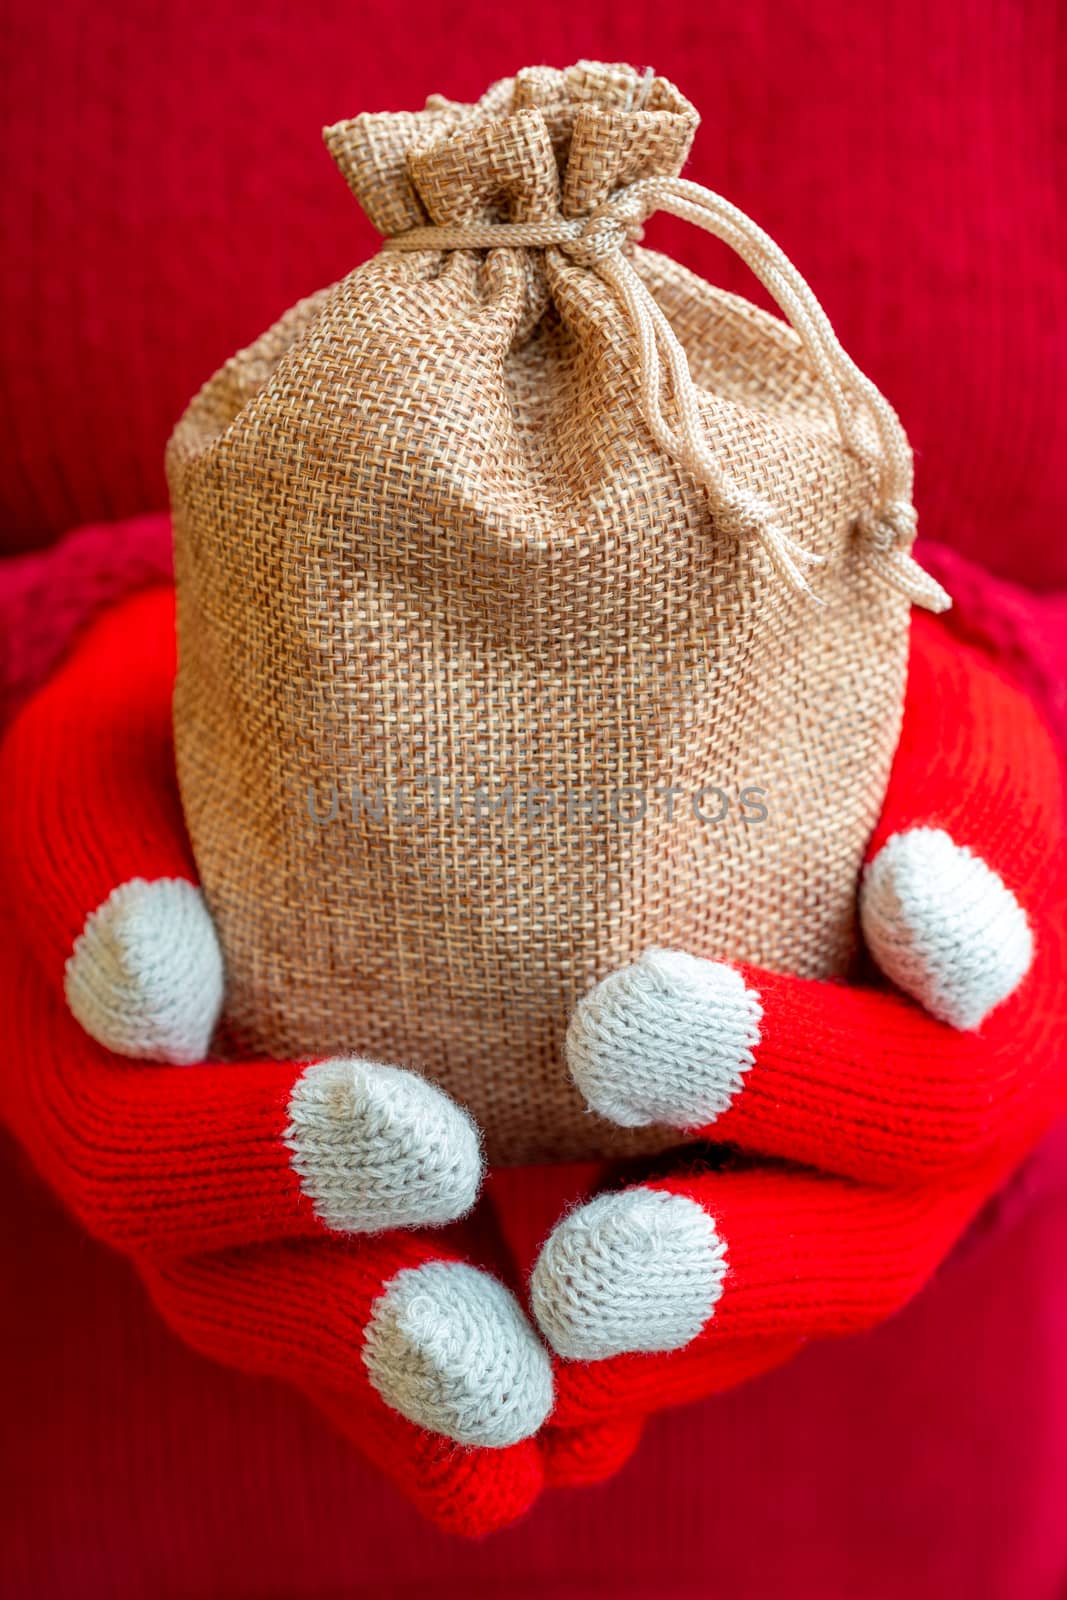 Christmas gifts bag in female hands. Red knitted gloves and a sweater.